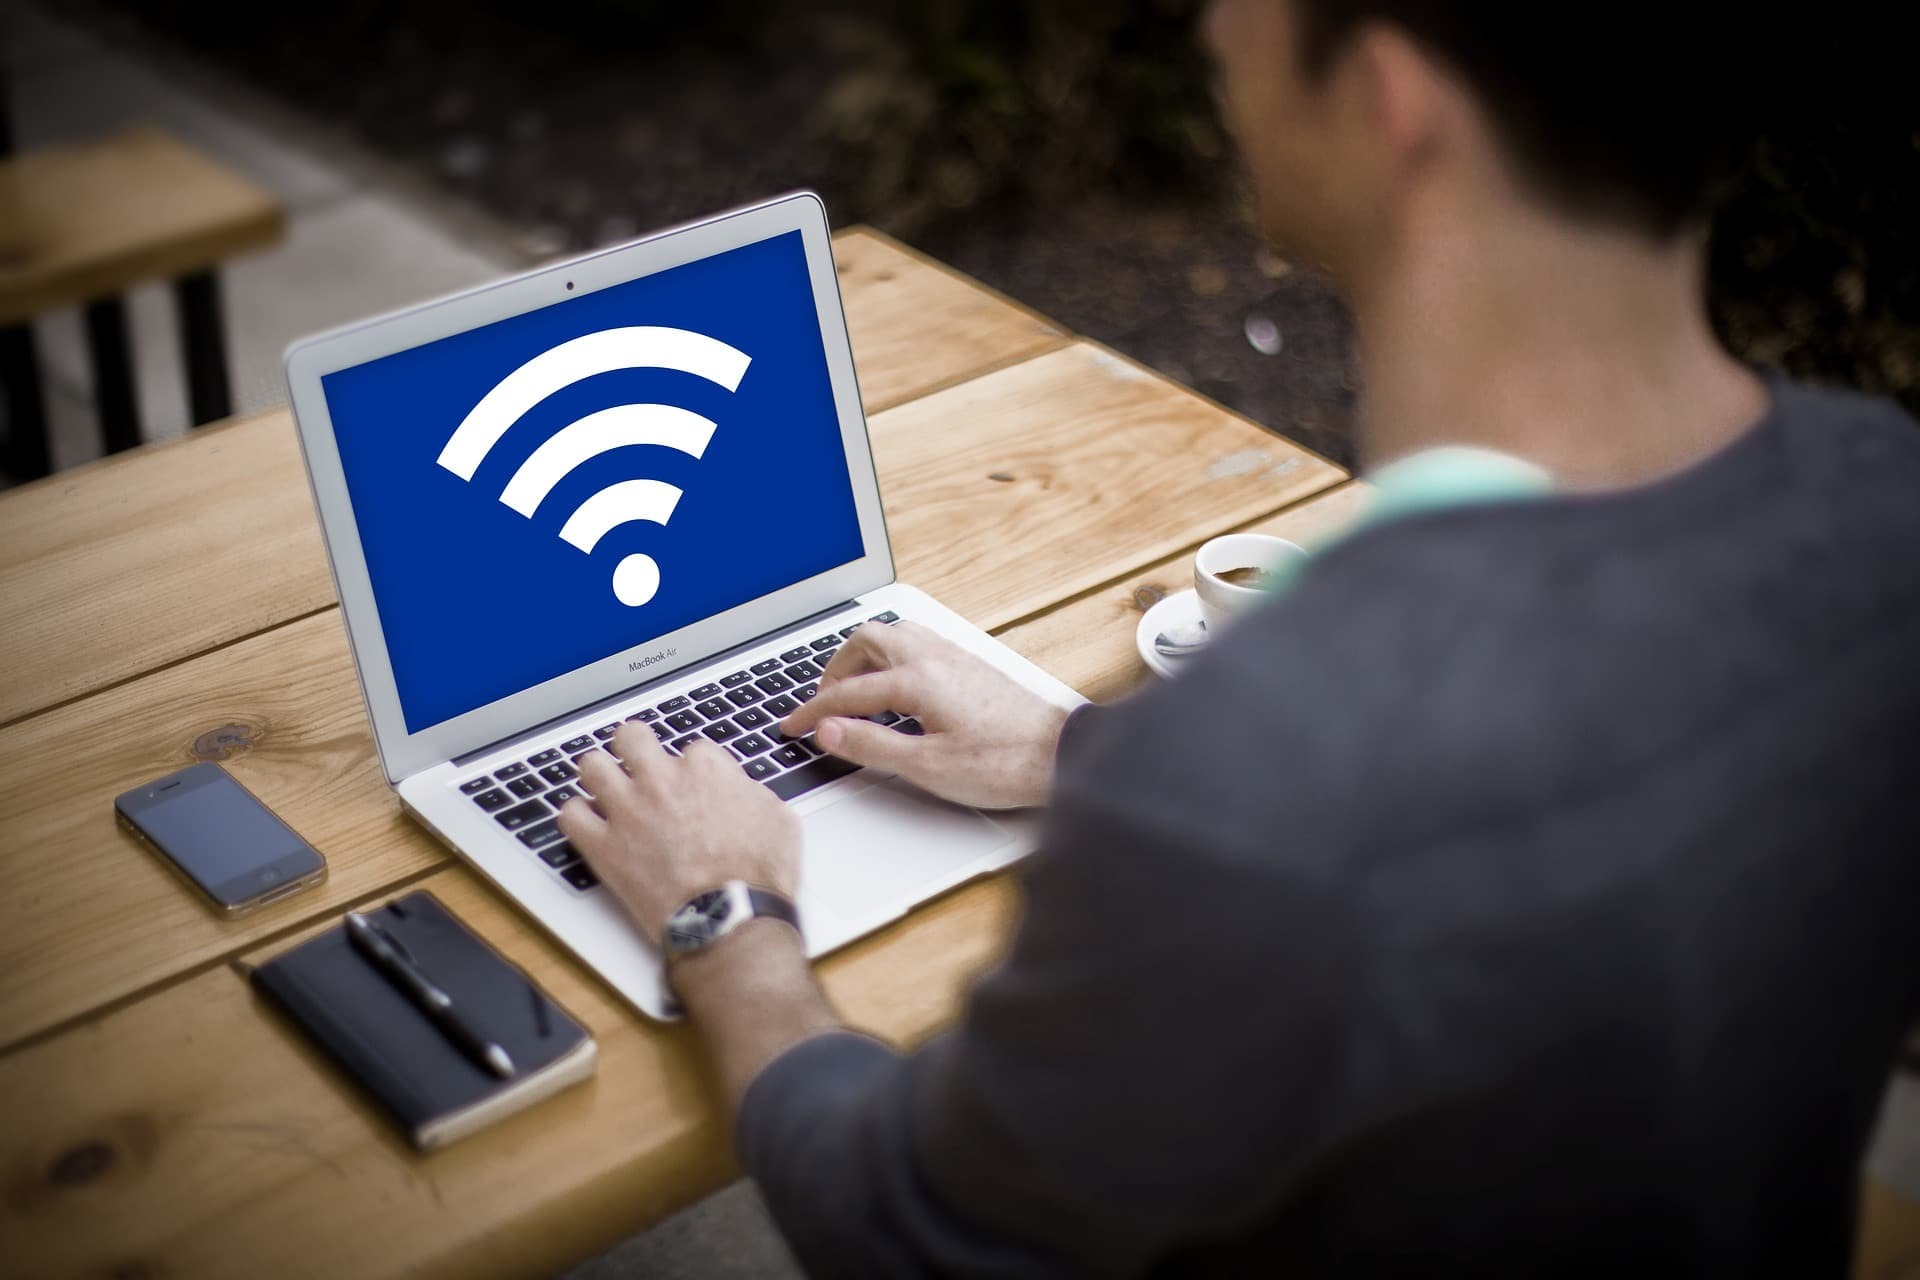 How To Share WiFi Password To Laptop